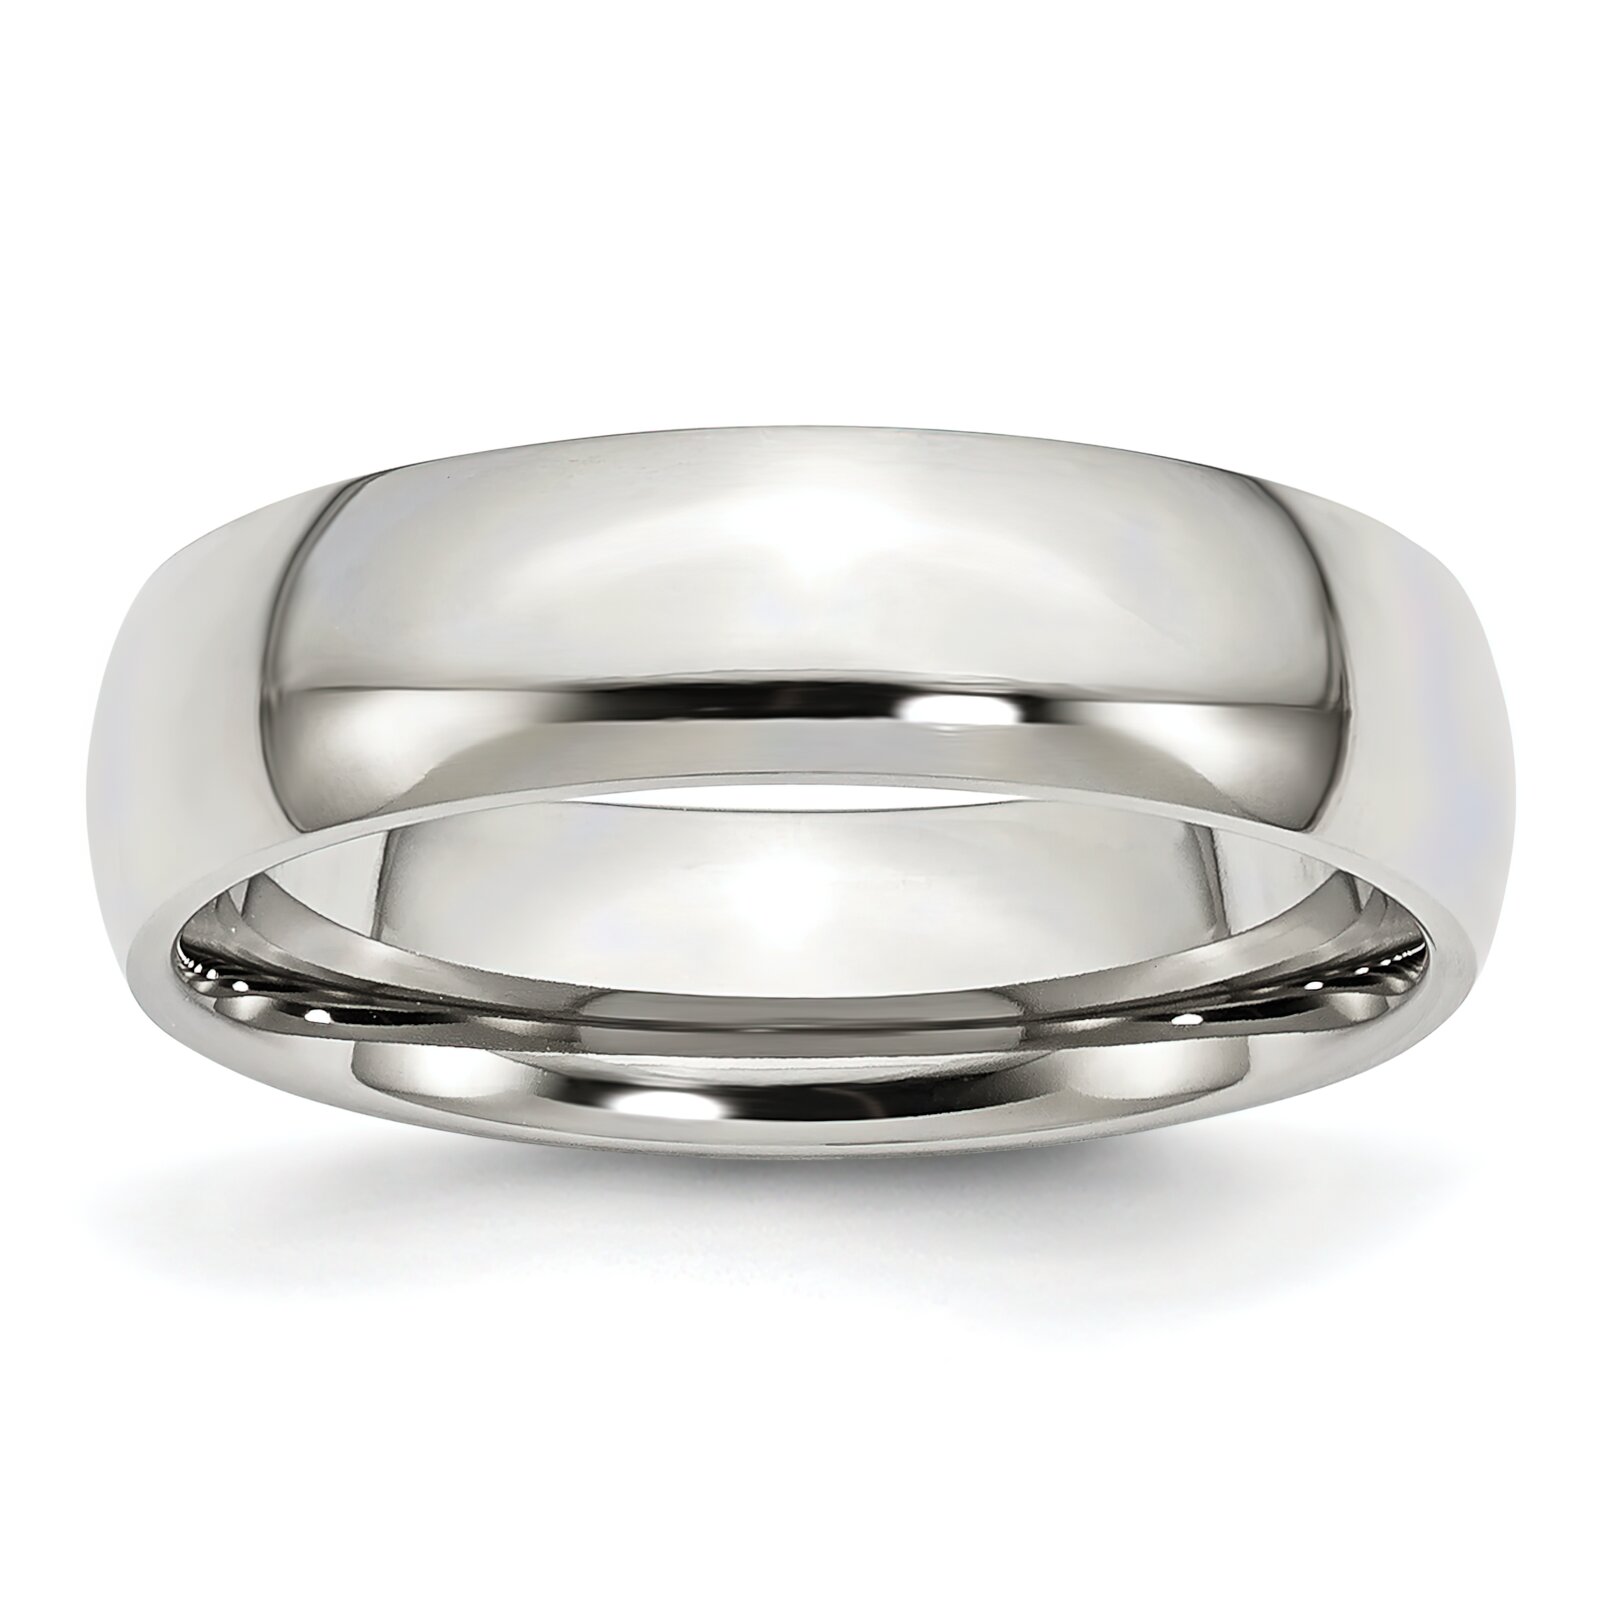 Findingking Stainless Steel 6mm Wedding Ring Band Size 8